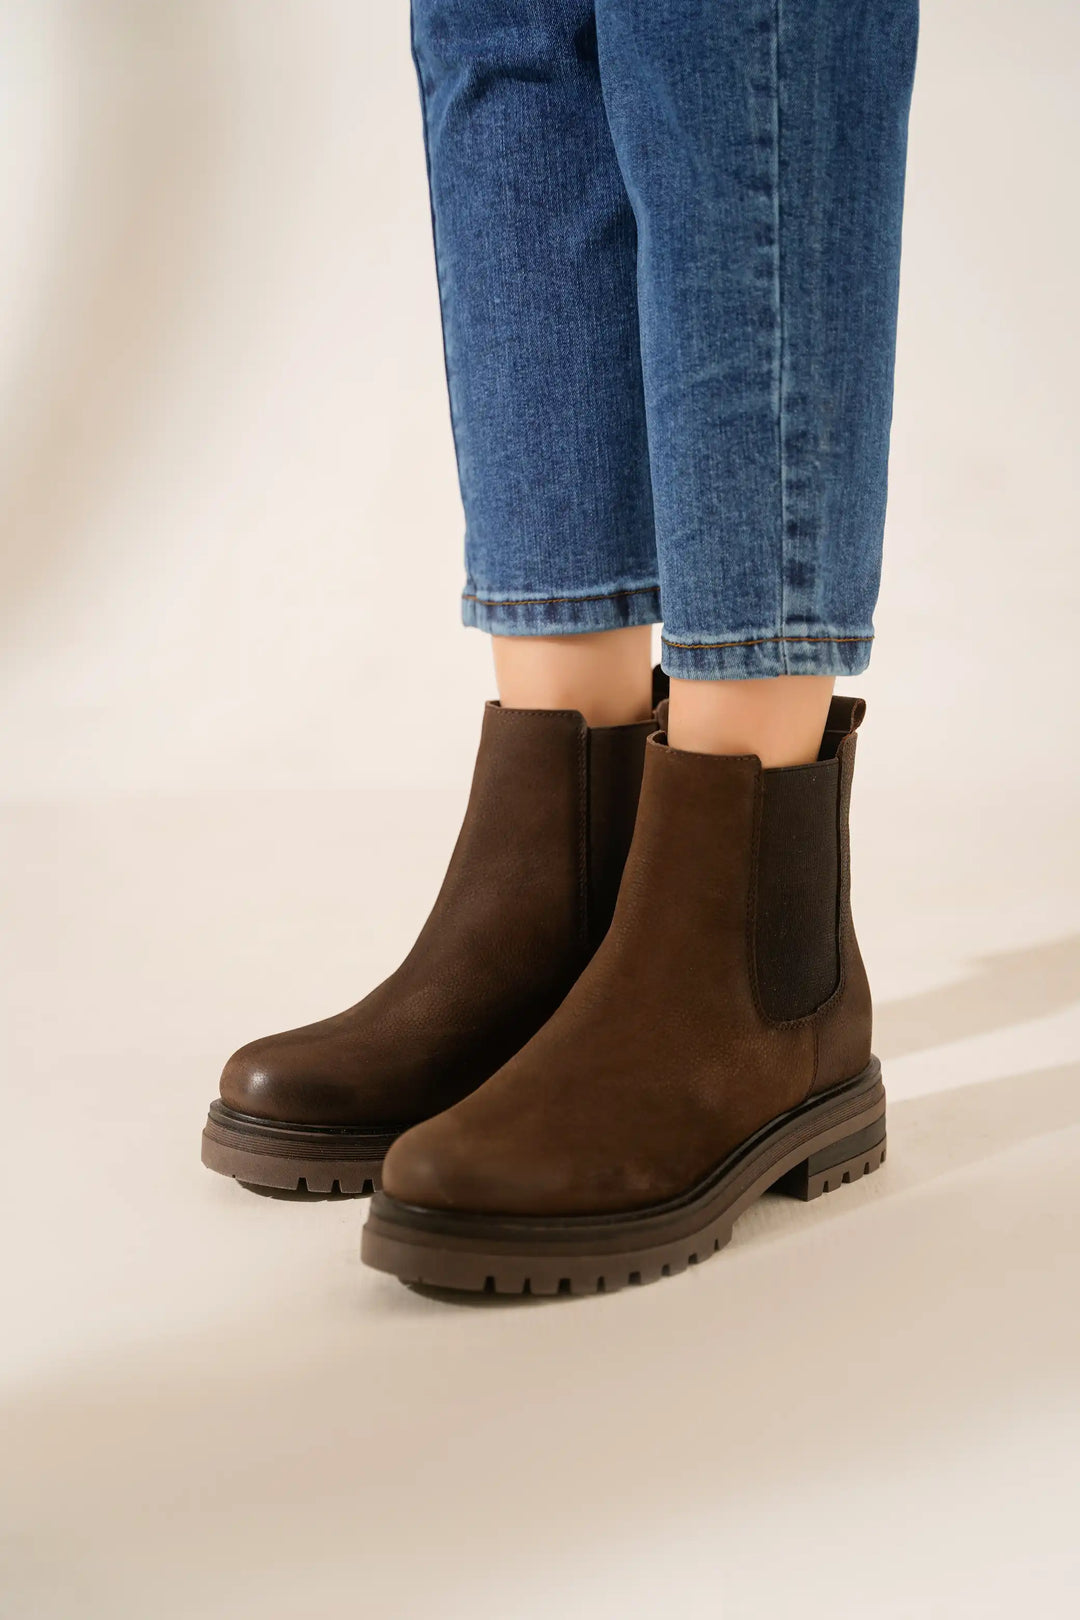 CHOCOLATE CHELSEA SUEDE BOOT